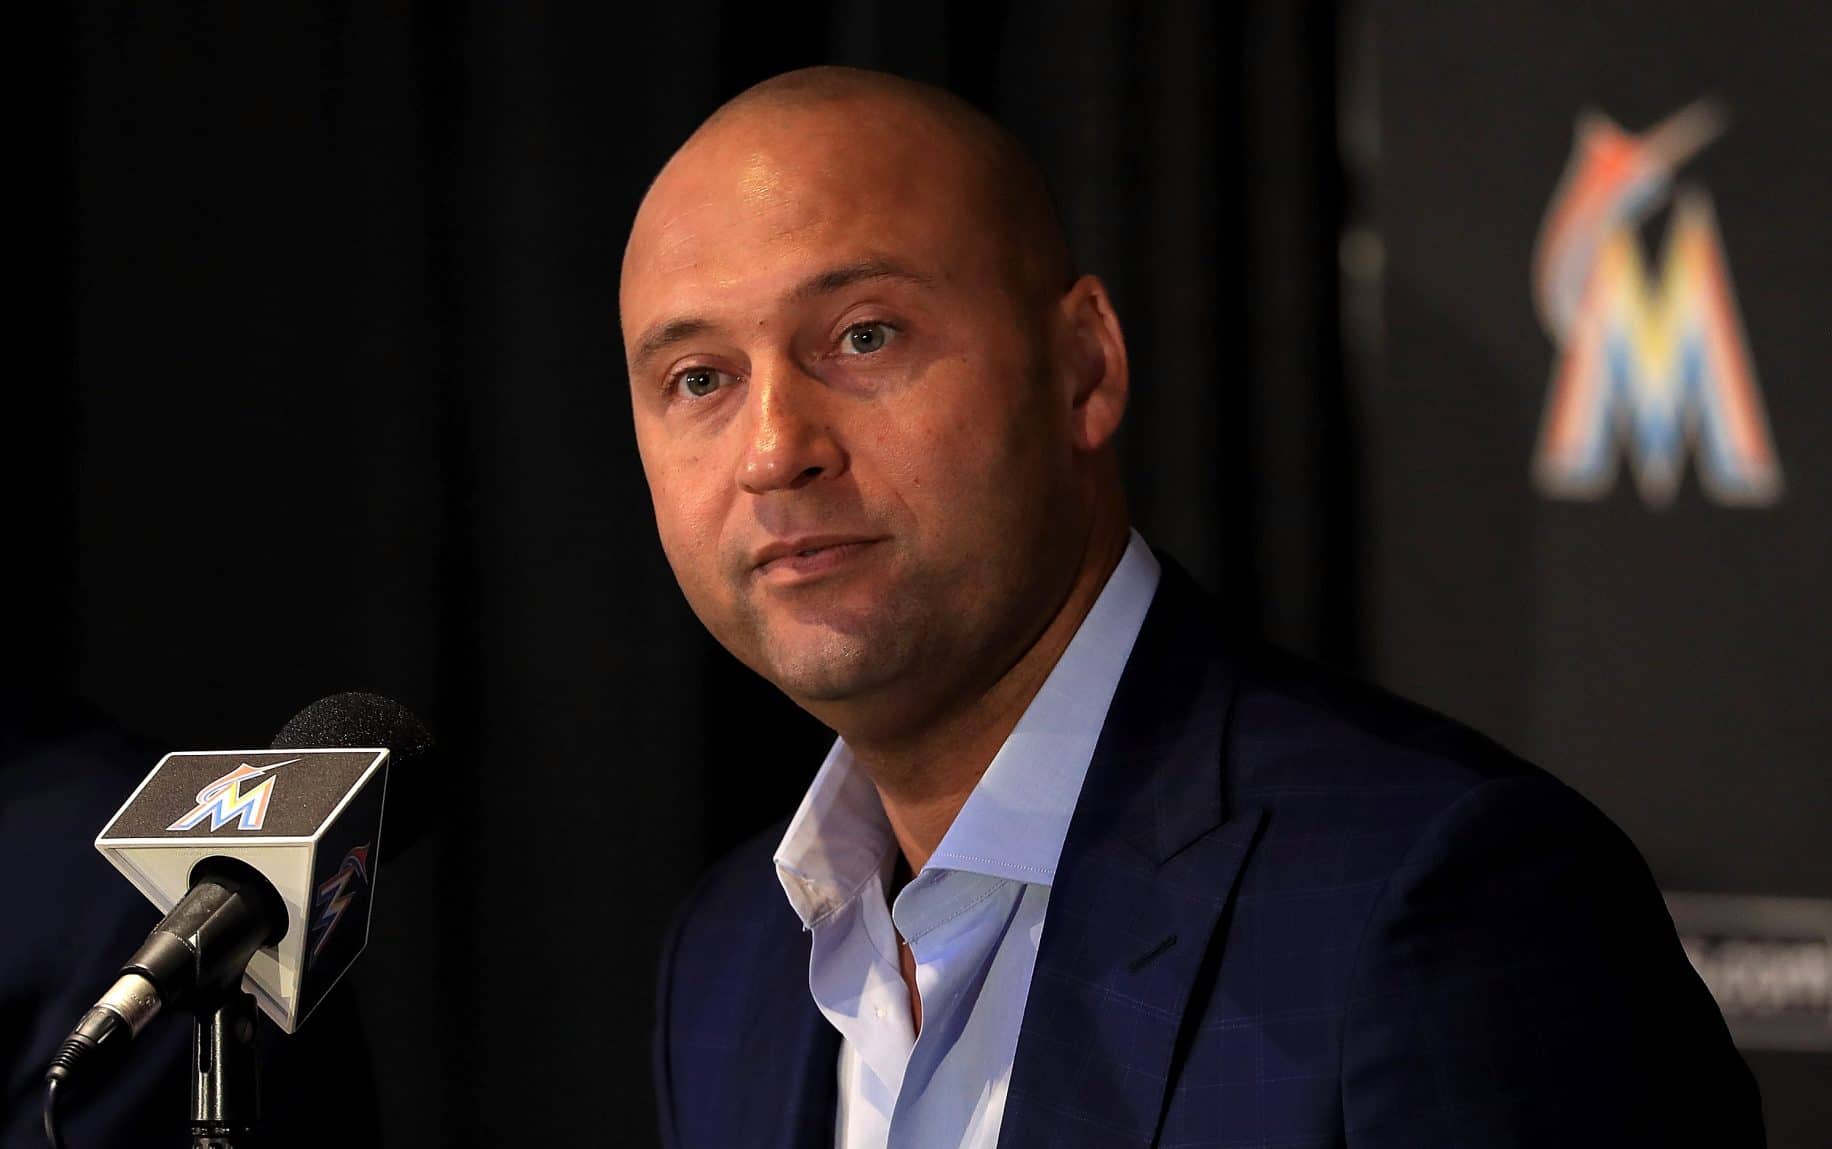 Derek Jeter's house of cards rapidly comes tumbling down